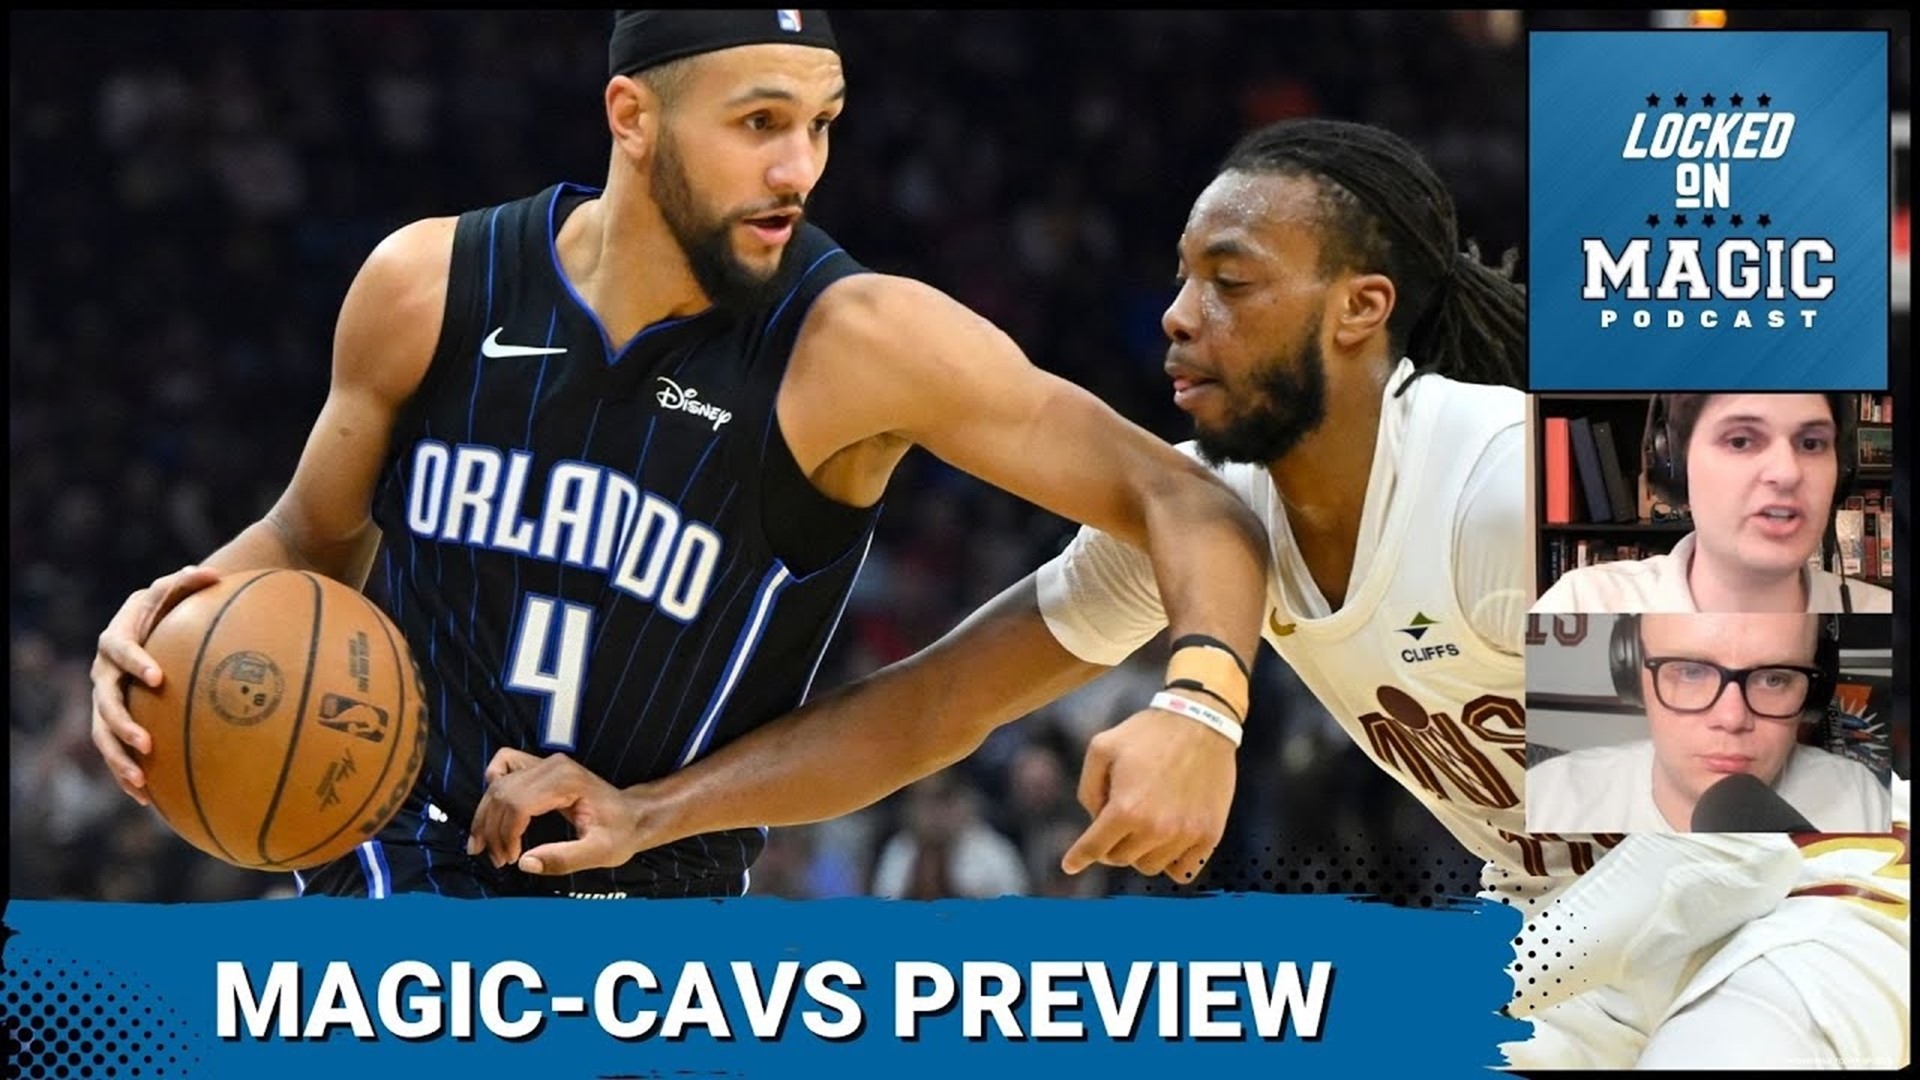 The Orlando Magic and Cleveland Cavaliers are both teams filled with questions as they try to advance in the Playoffs and map out their future.